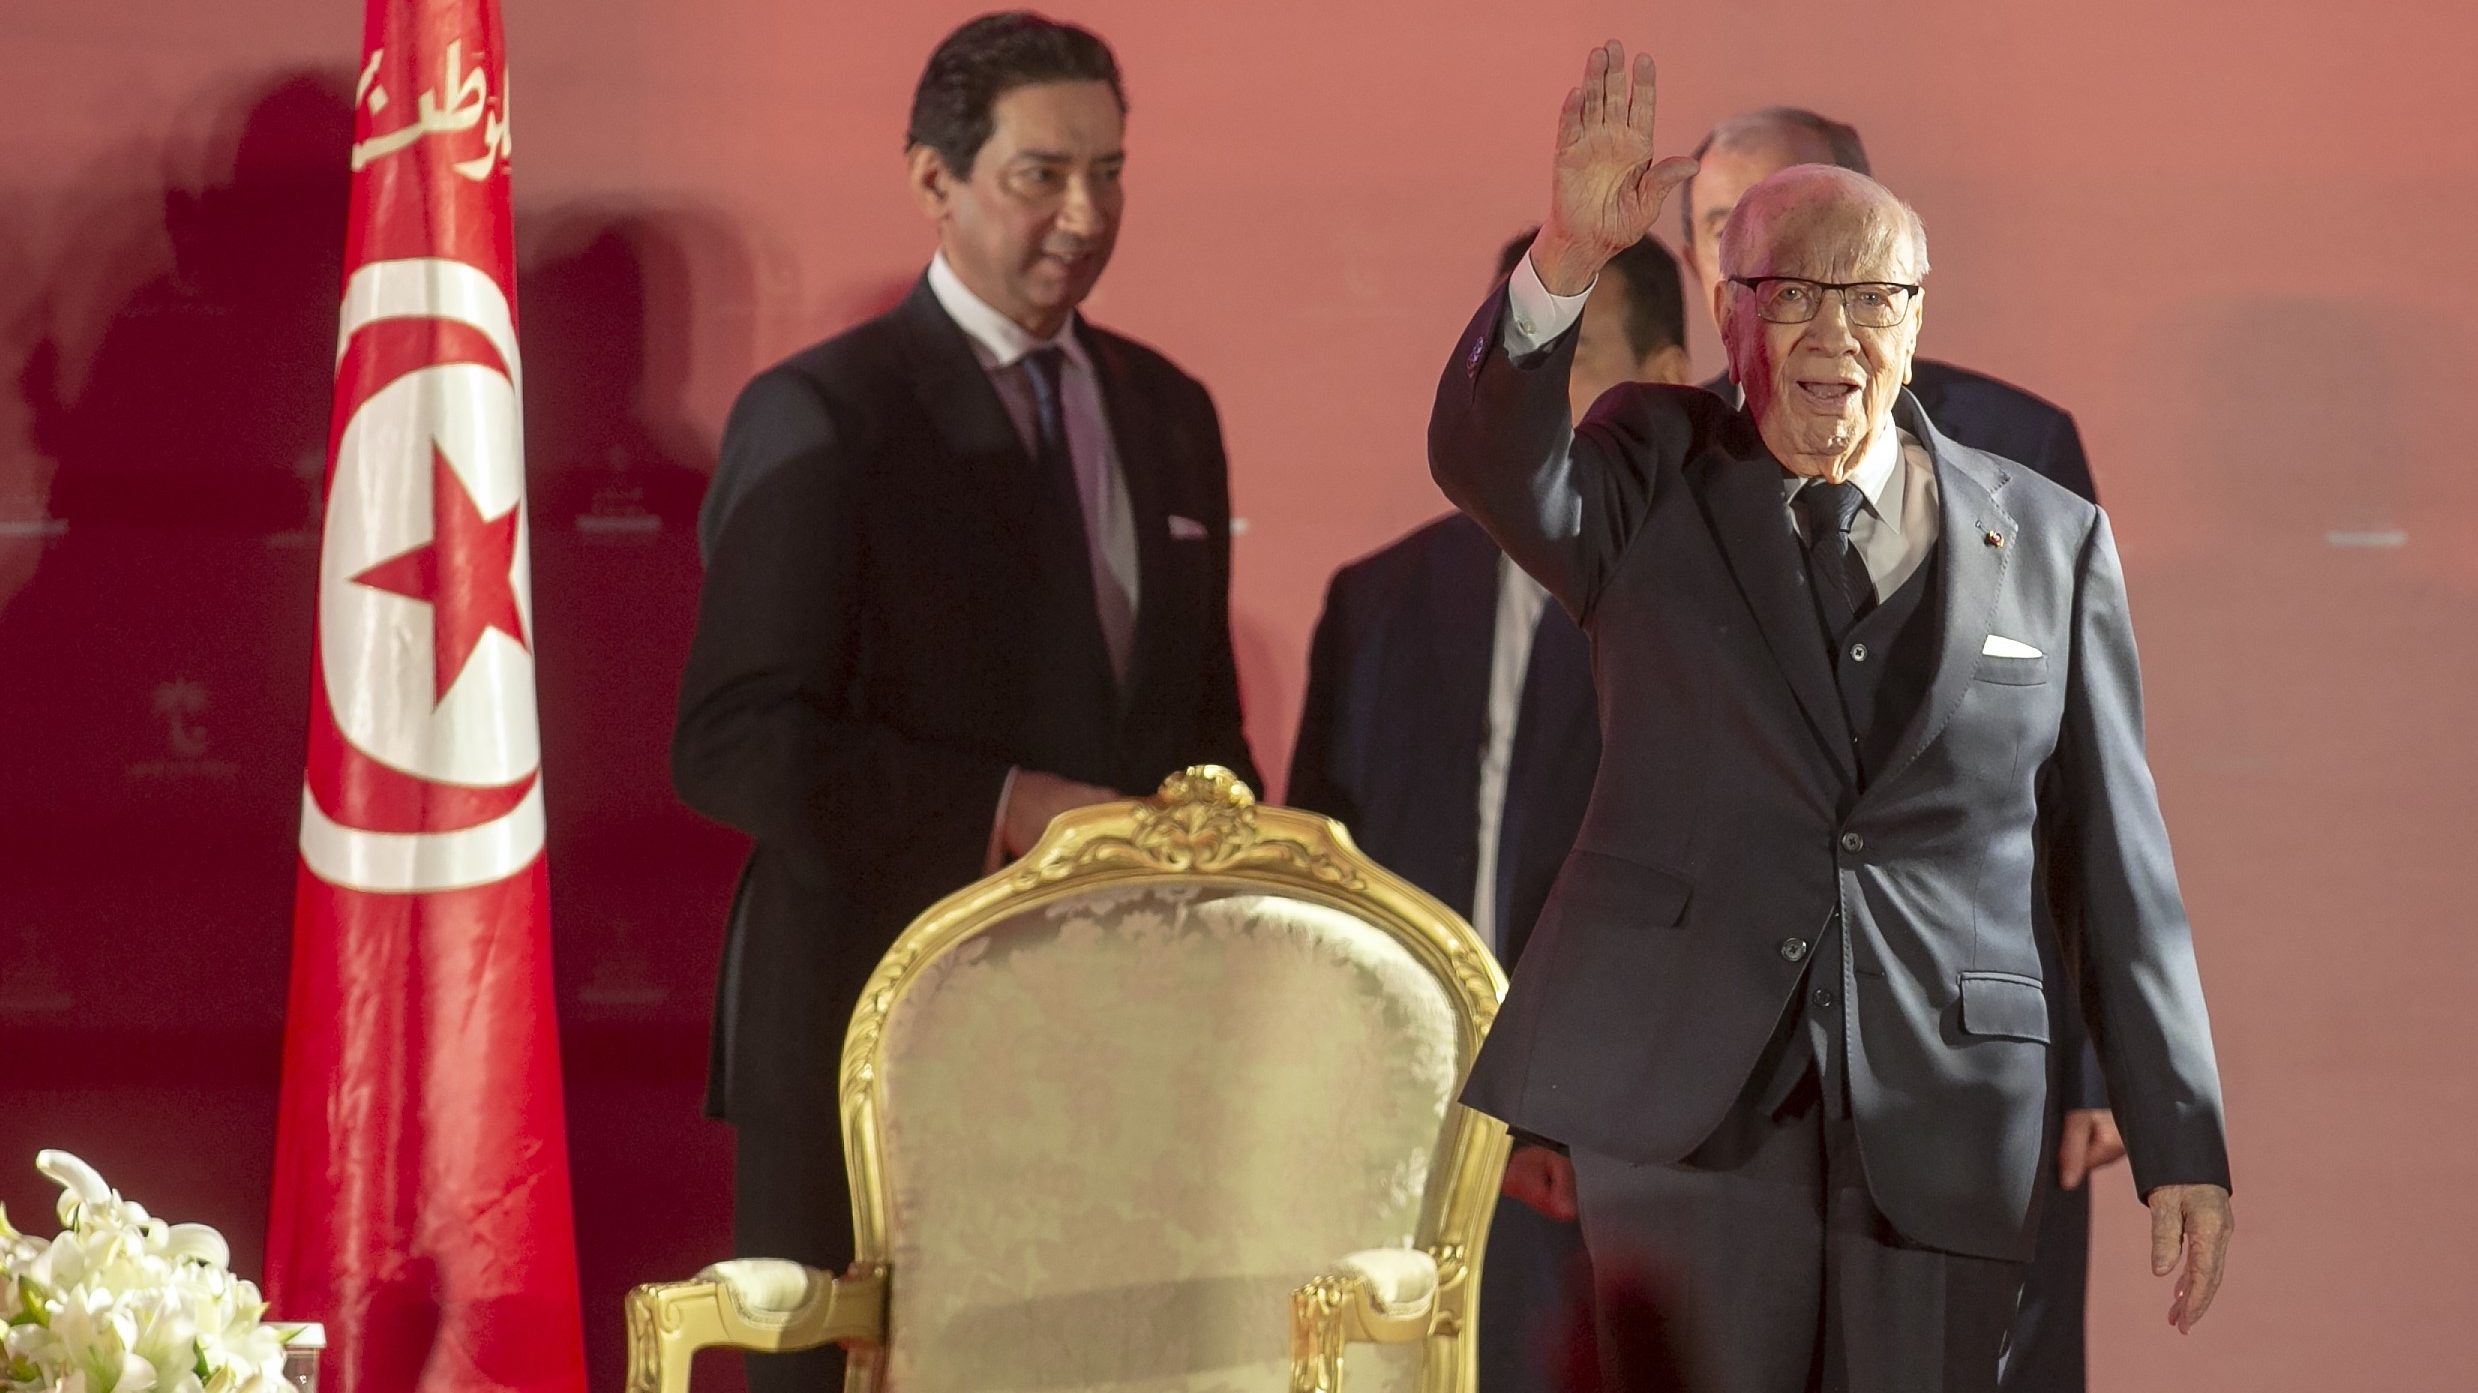 Tunisia Faces Uphill Battle After President’s Death (AUDIO INTERVIEW)